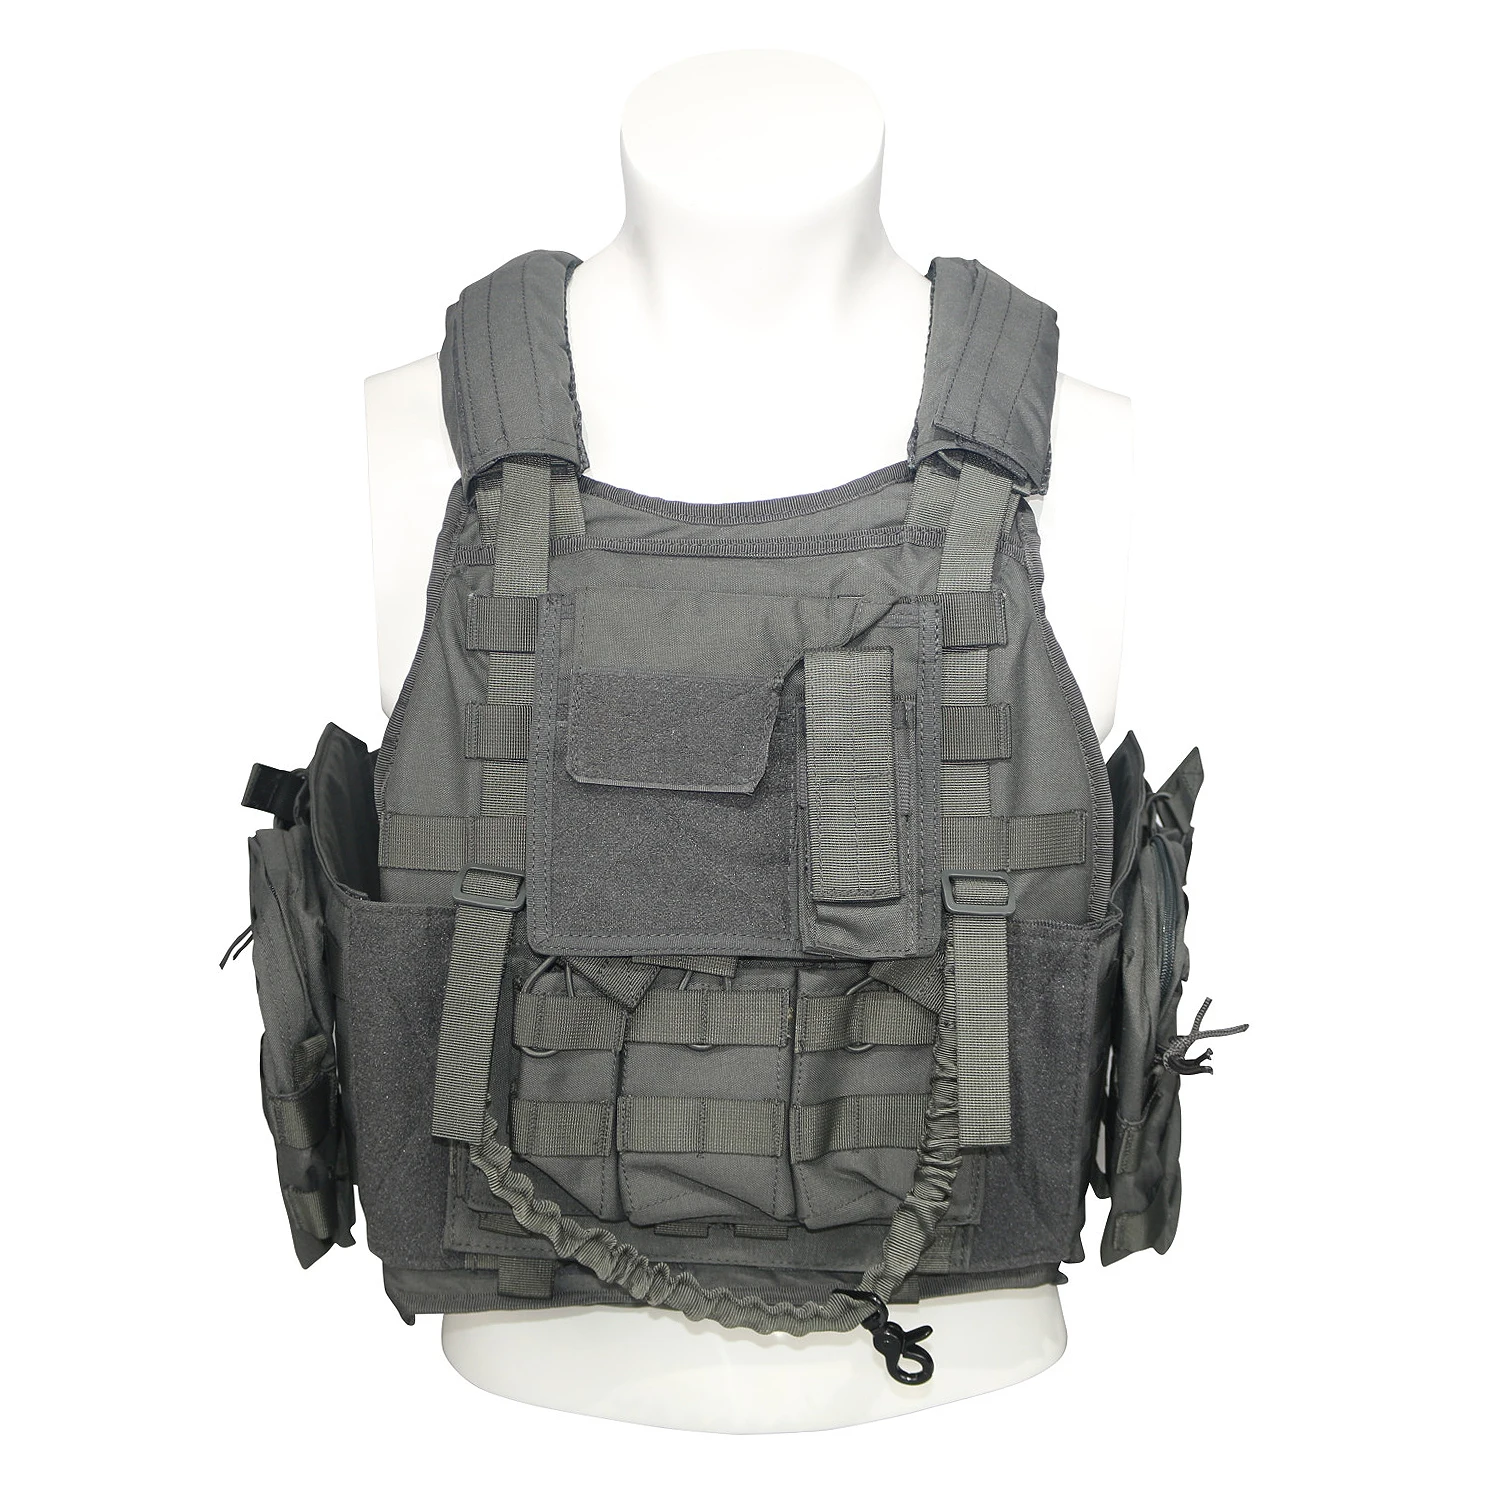 

Army Airsoft Tactical Vest Shooting Militar Chaleco Tactico Assault Molle Quick Release Combat Police Vest, Black